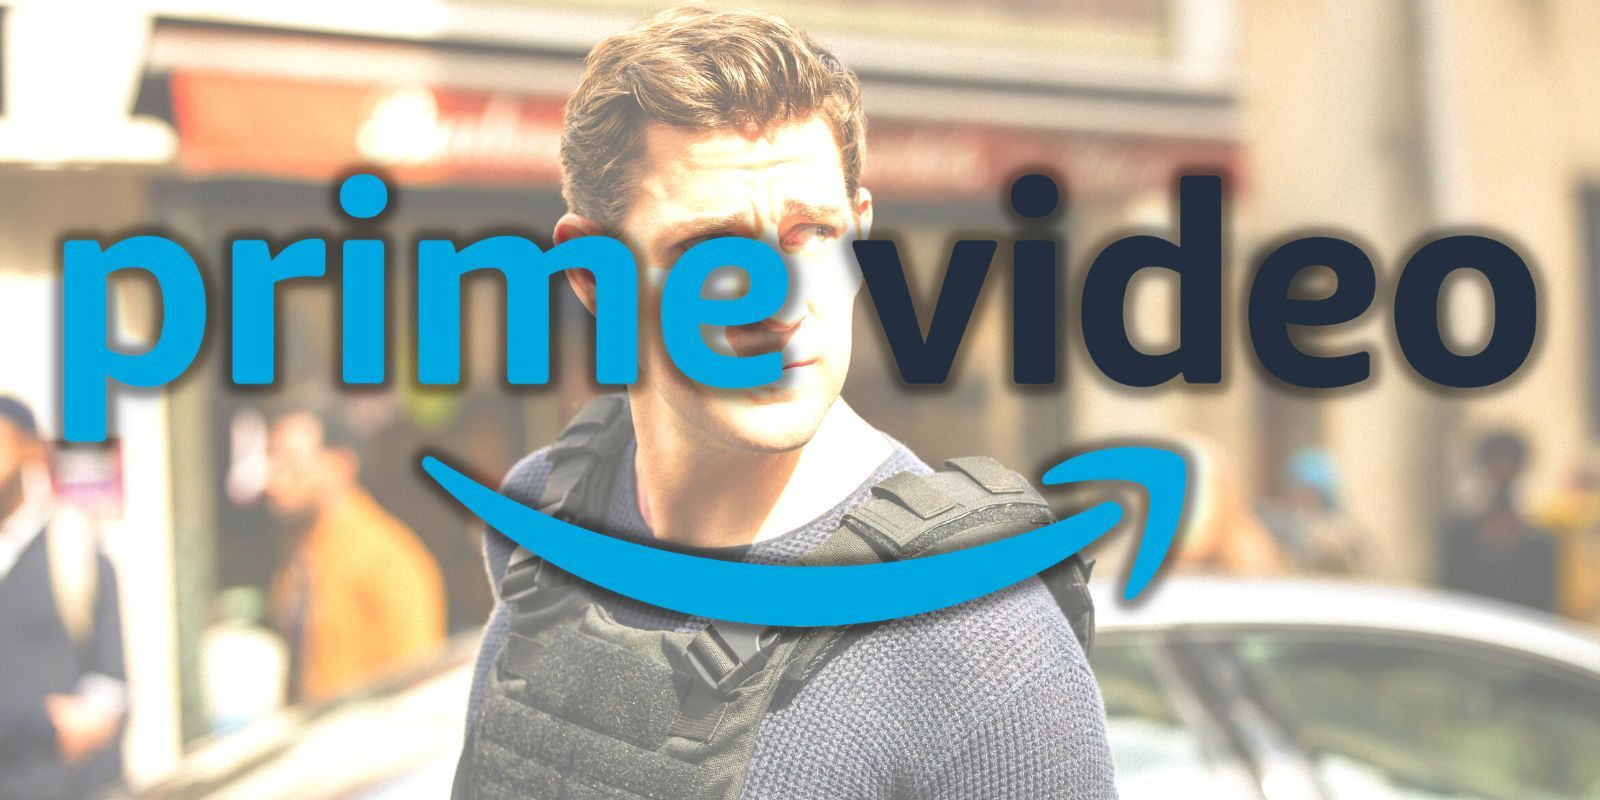 Jack Ryan shifts his head to the side and looks up behind the Prime Video logo